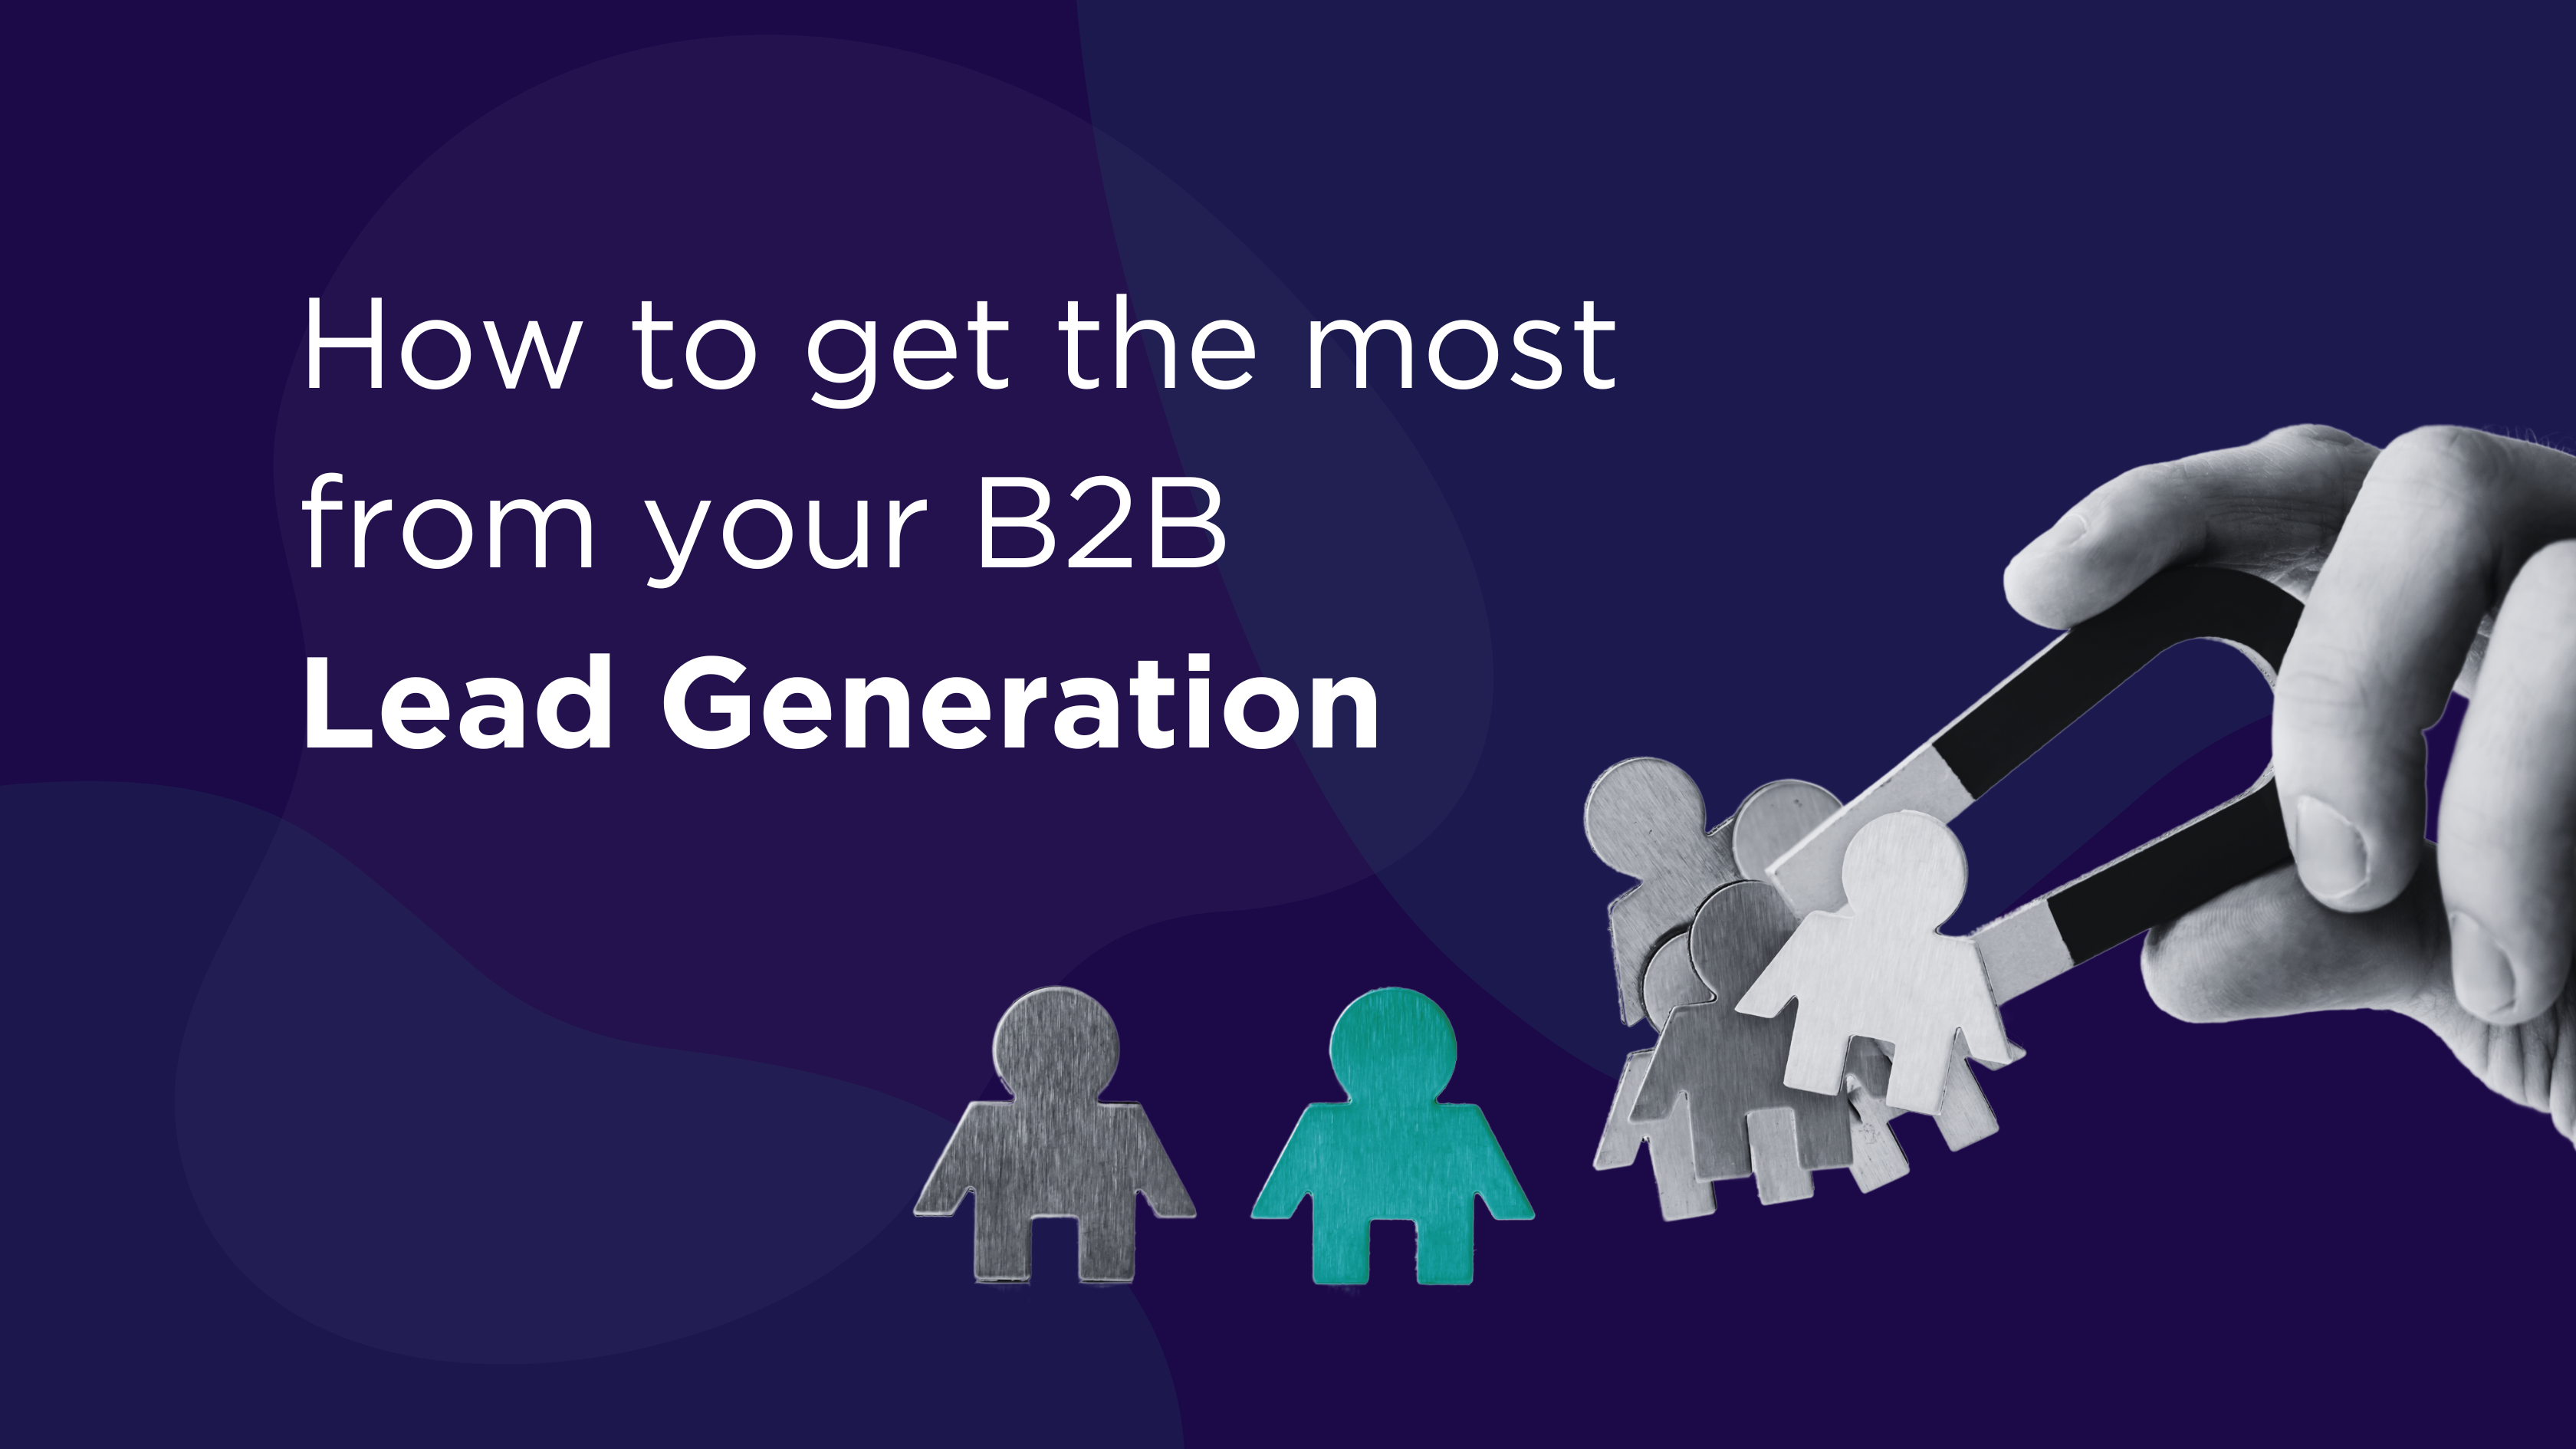 How to get the most from your Lead Generation